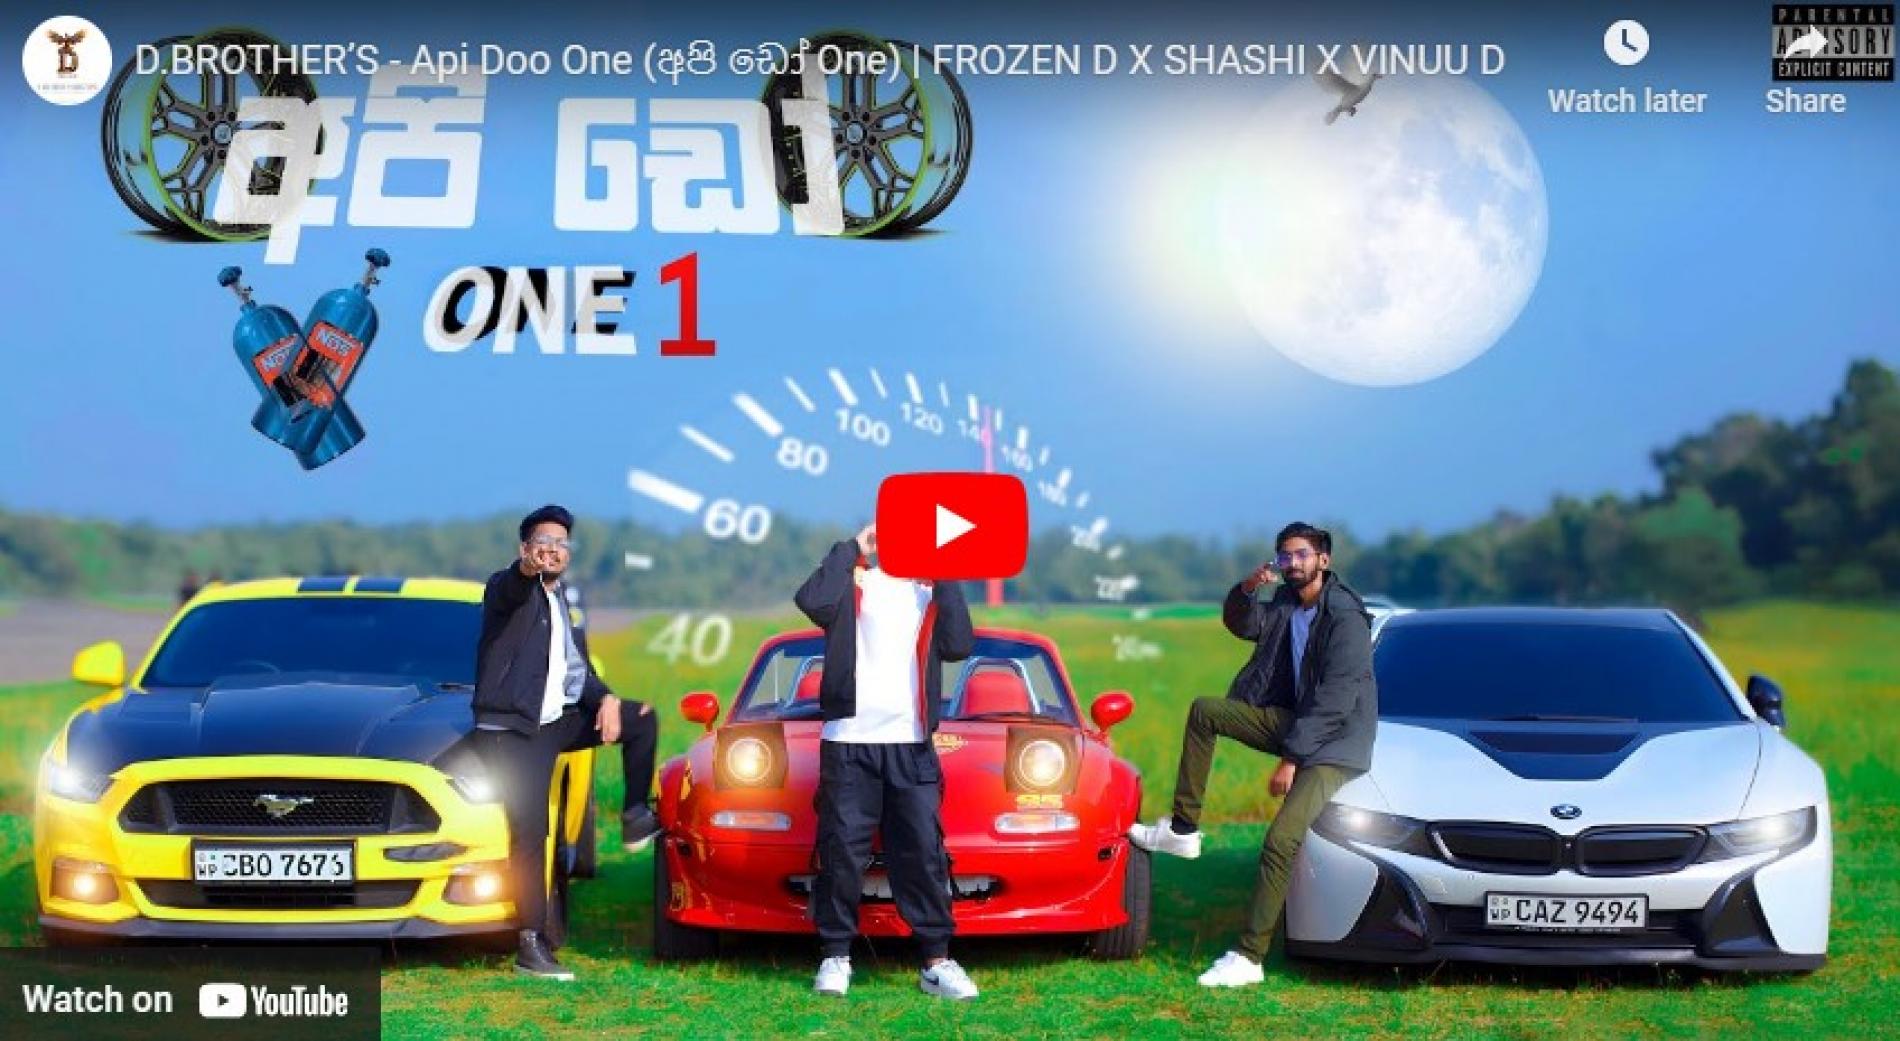 New Music : D.Brothers – Api Doo One (අපි ඩෝ One) | Frozen D X Shashi X Vinuu D